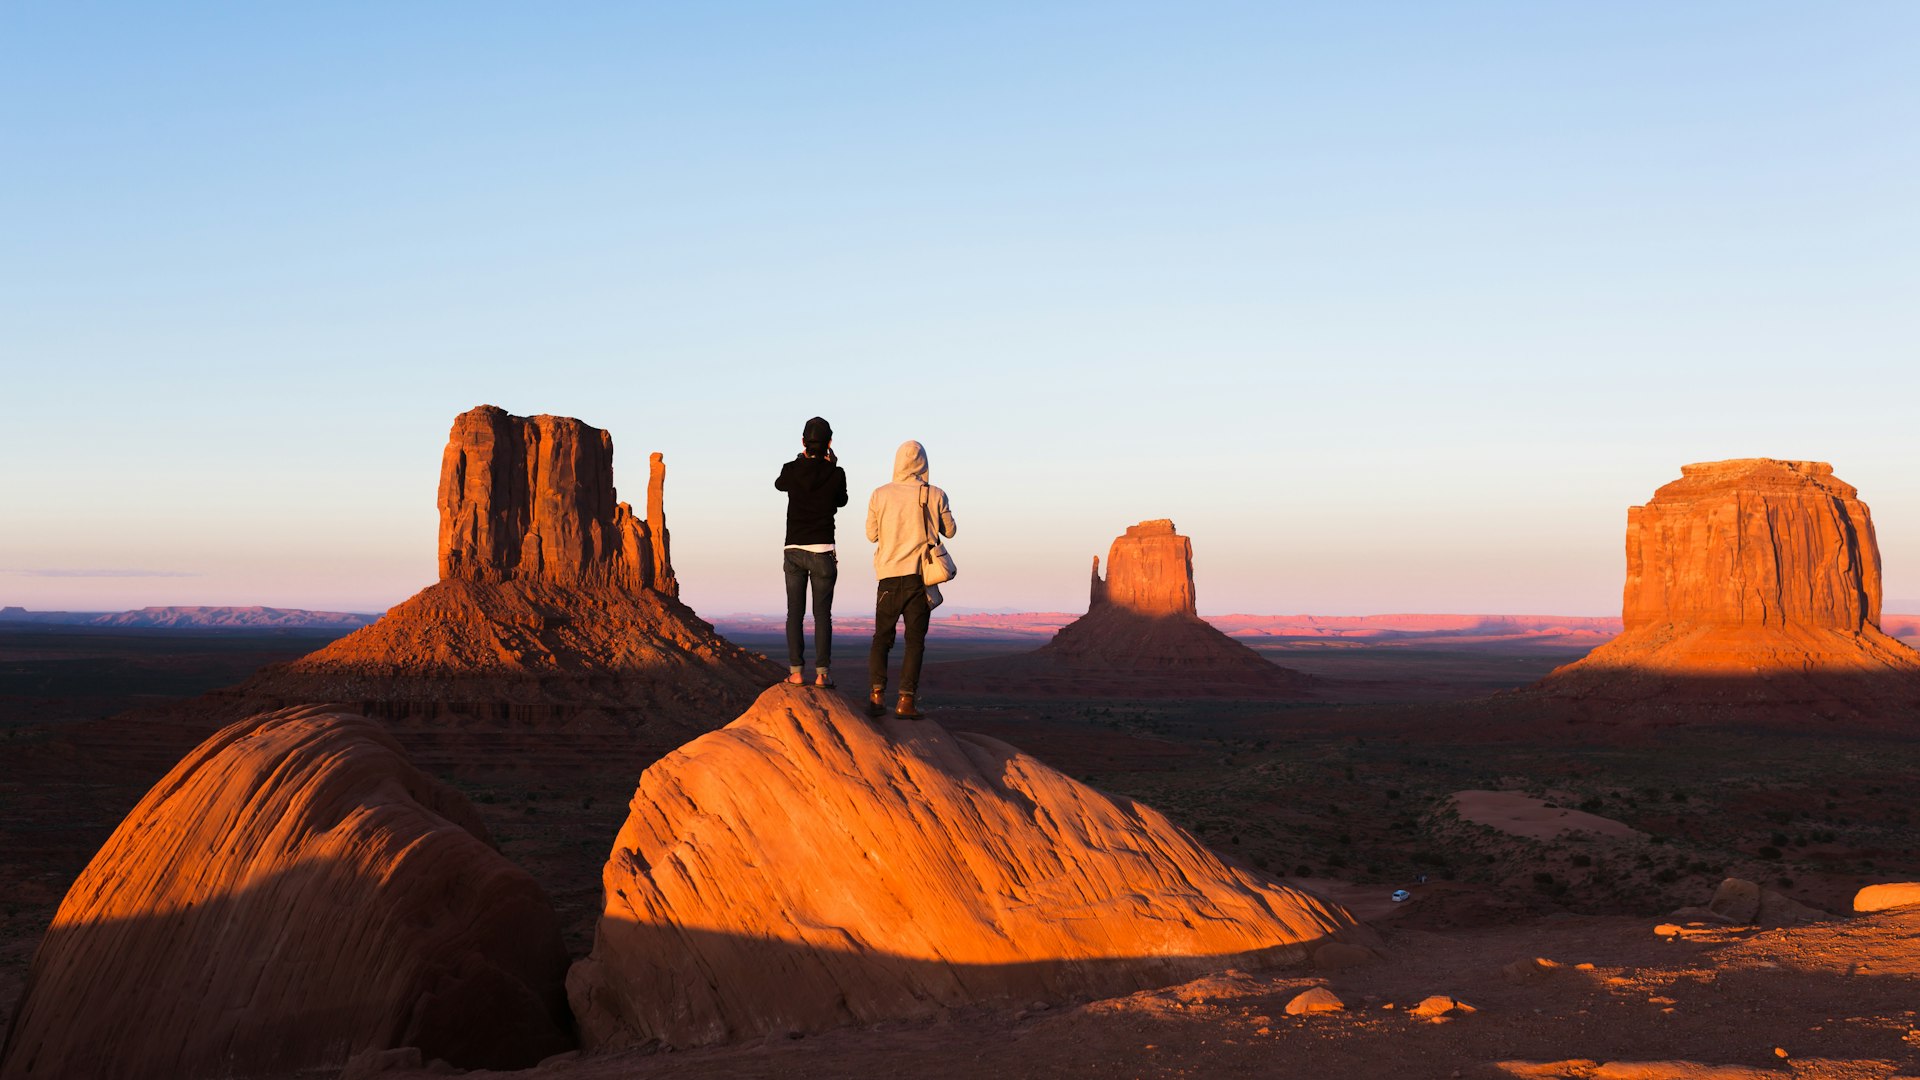 People watching the sunset in Monument Valley, Arizona